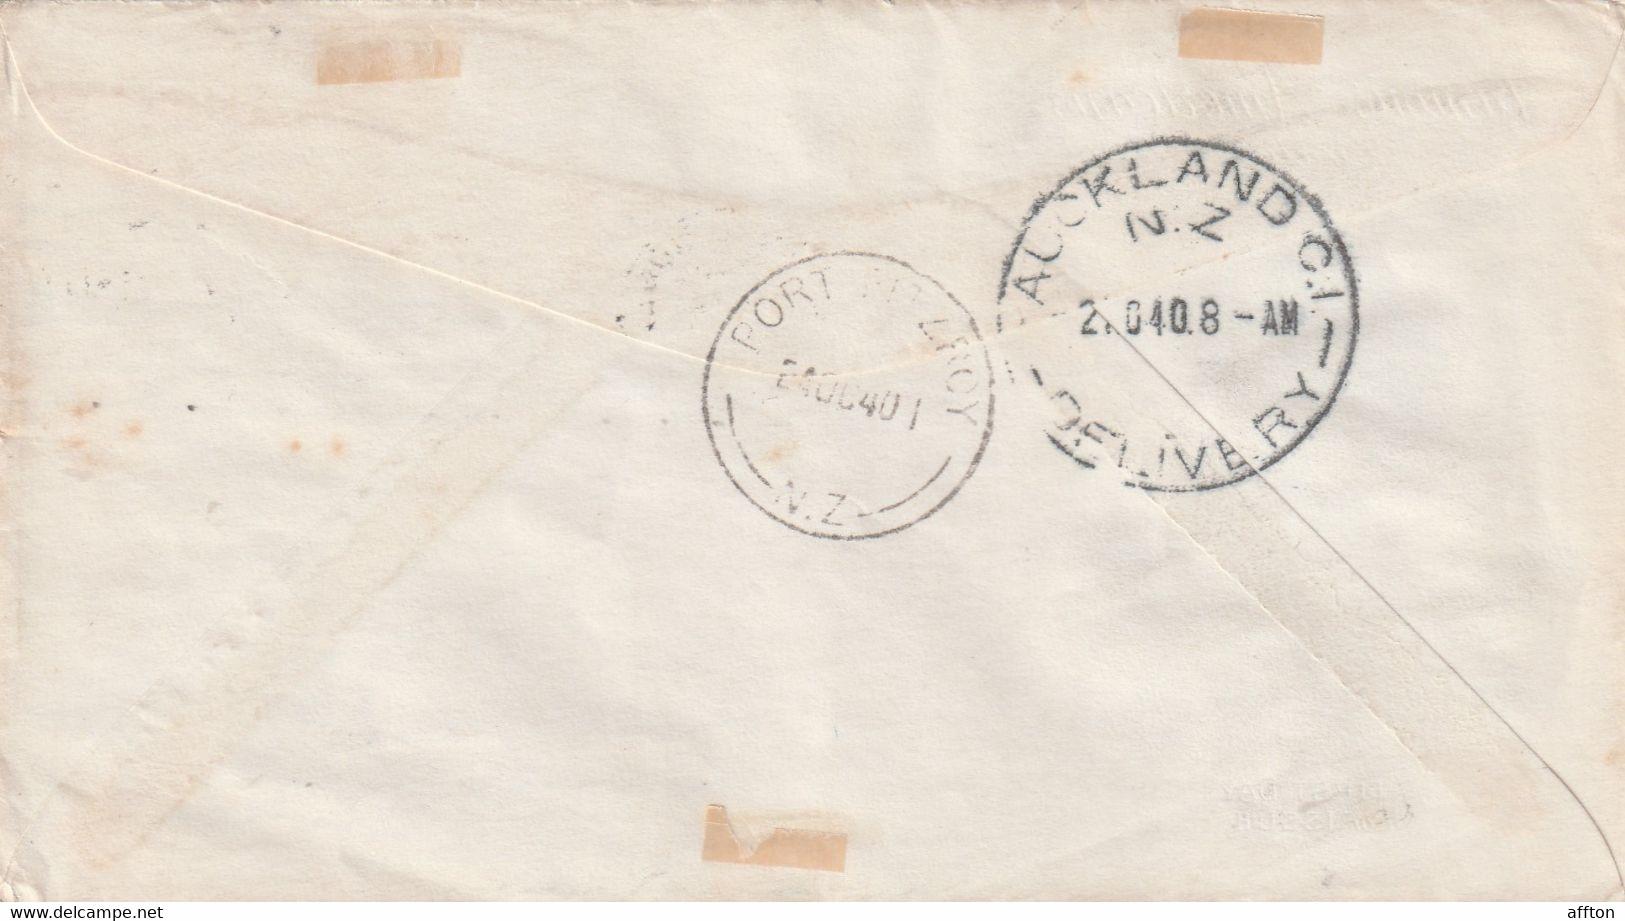 United States 1940 FDC Mailed To New Zealand - 1851-1940